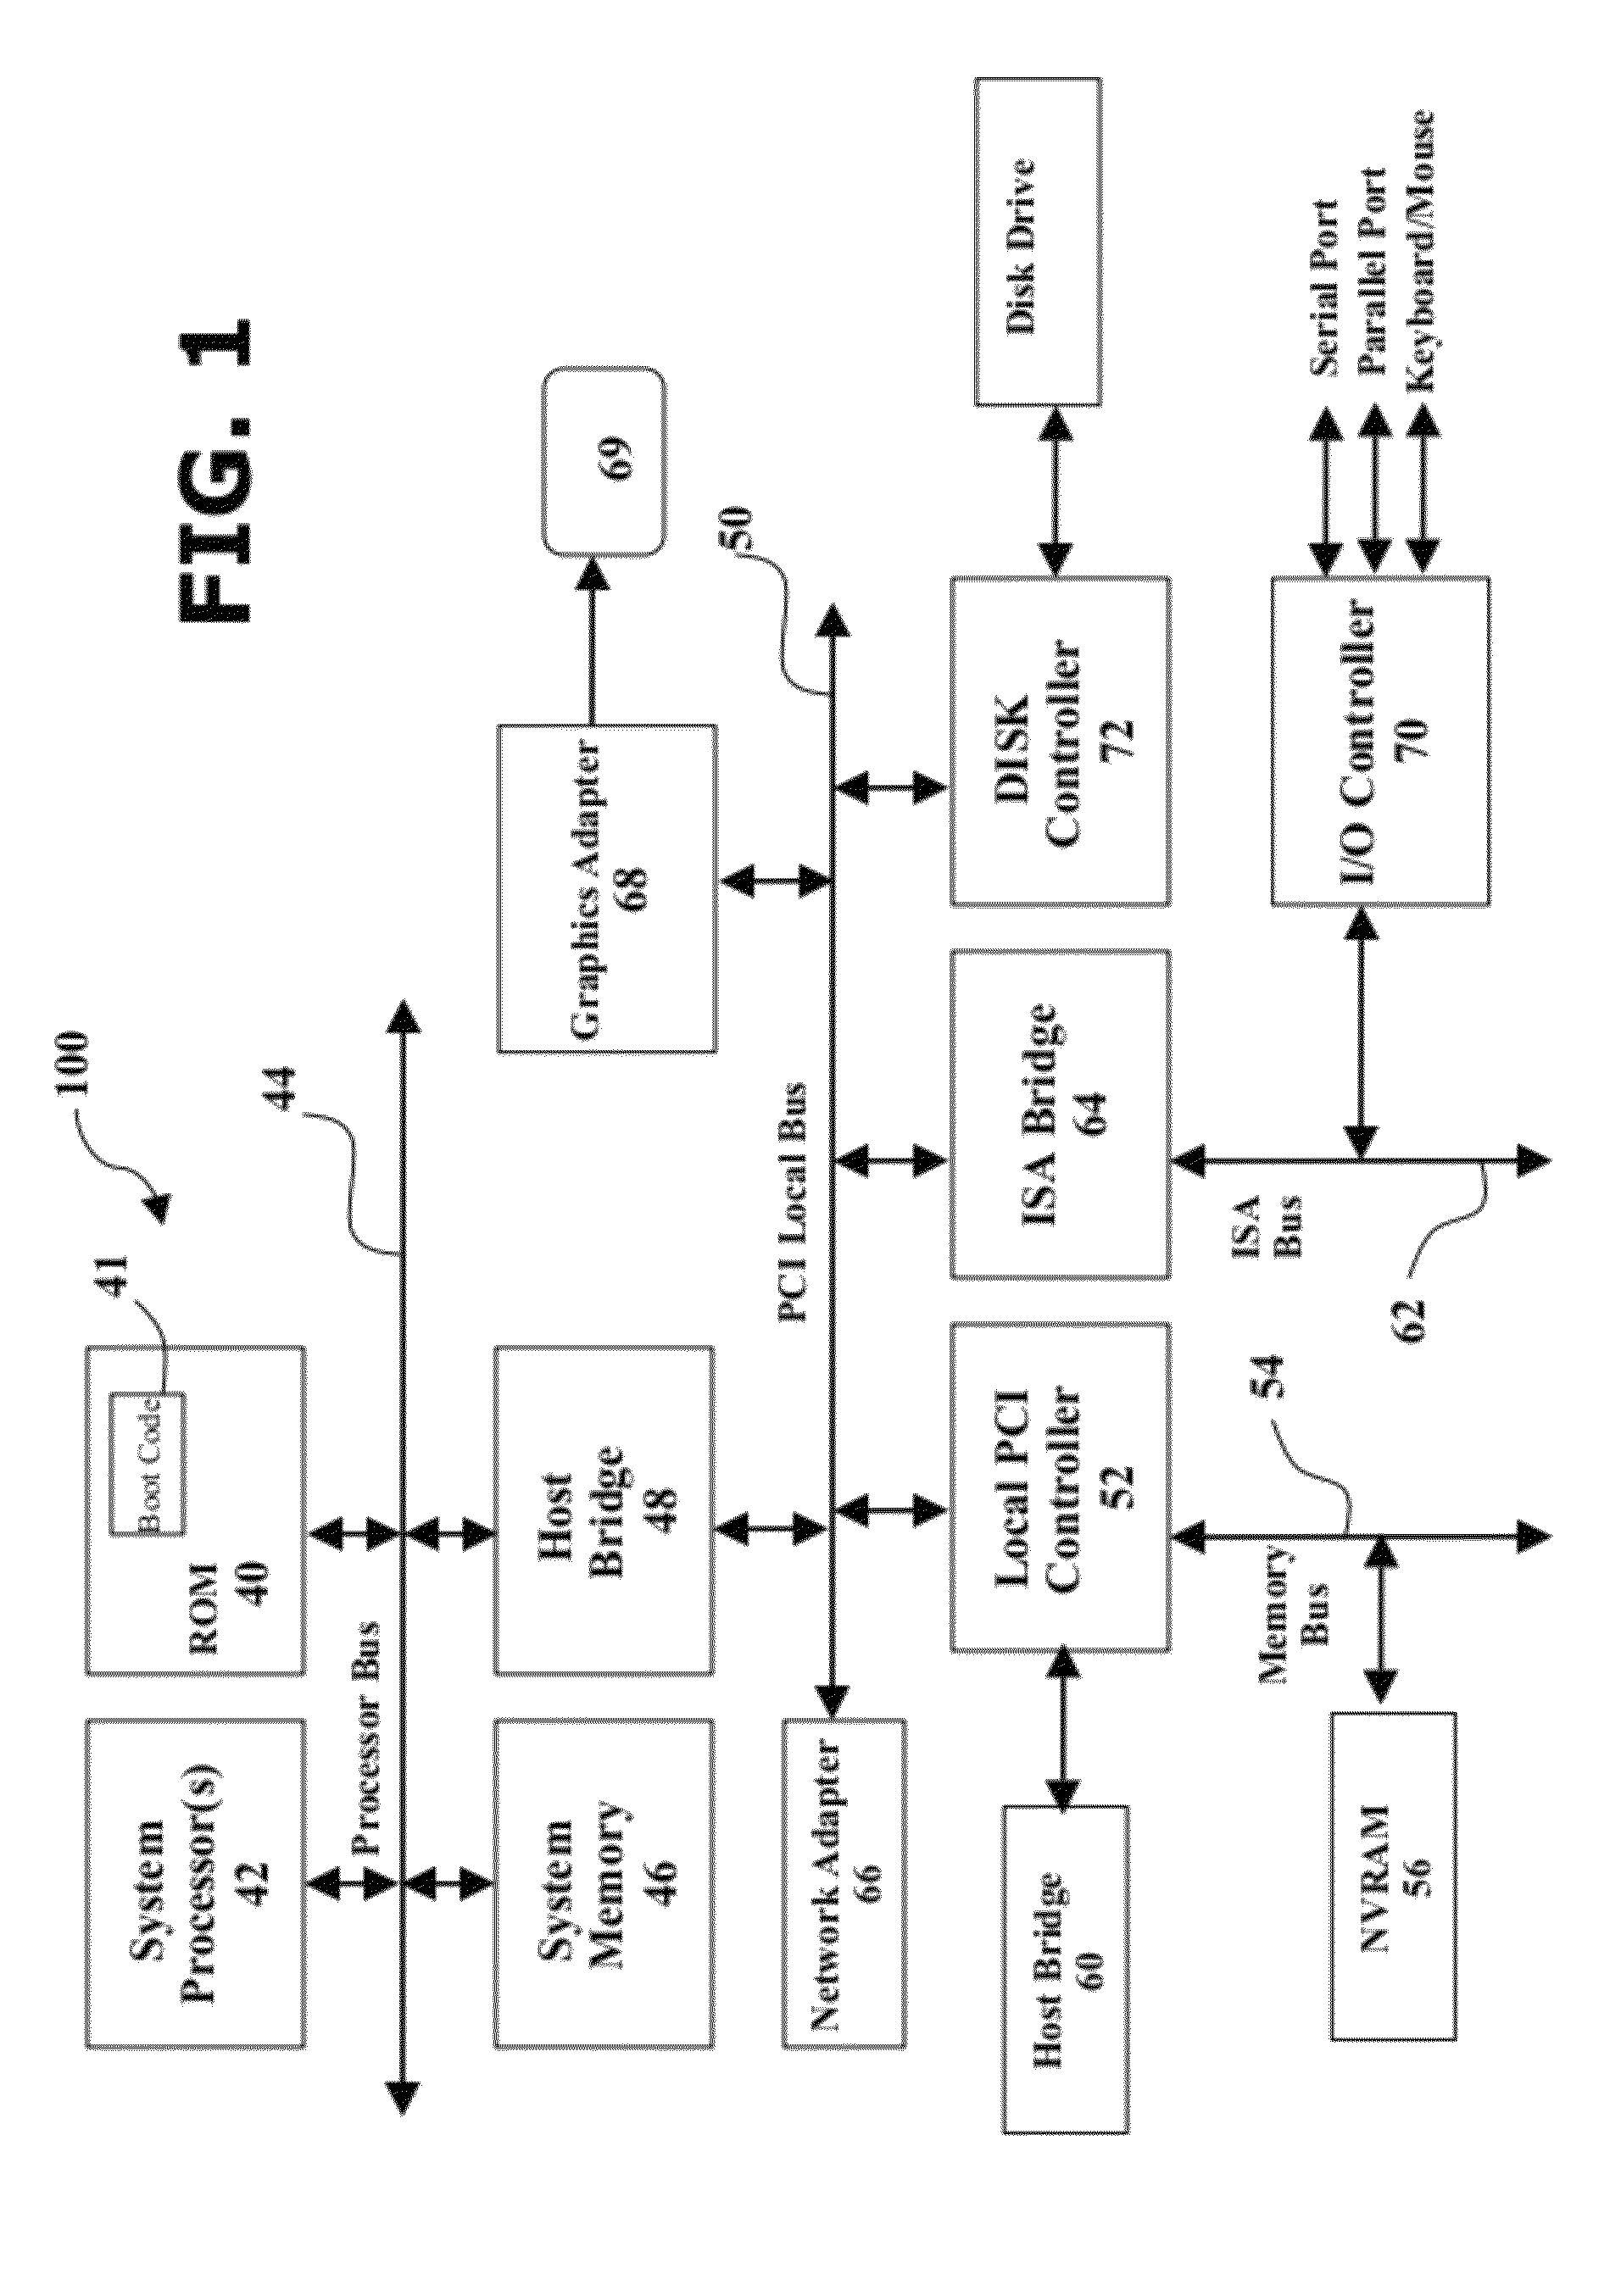 Systems and methods to control device endpoint behavior using personae and policies